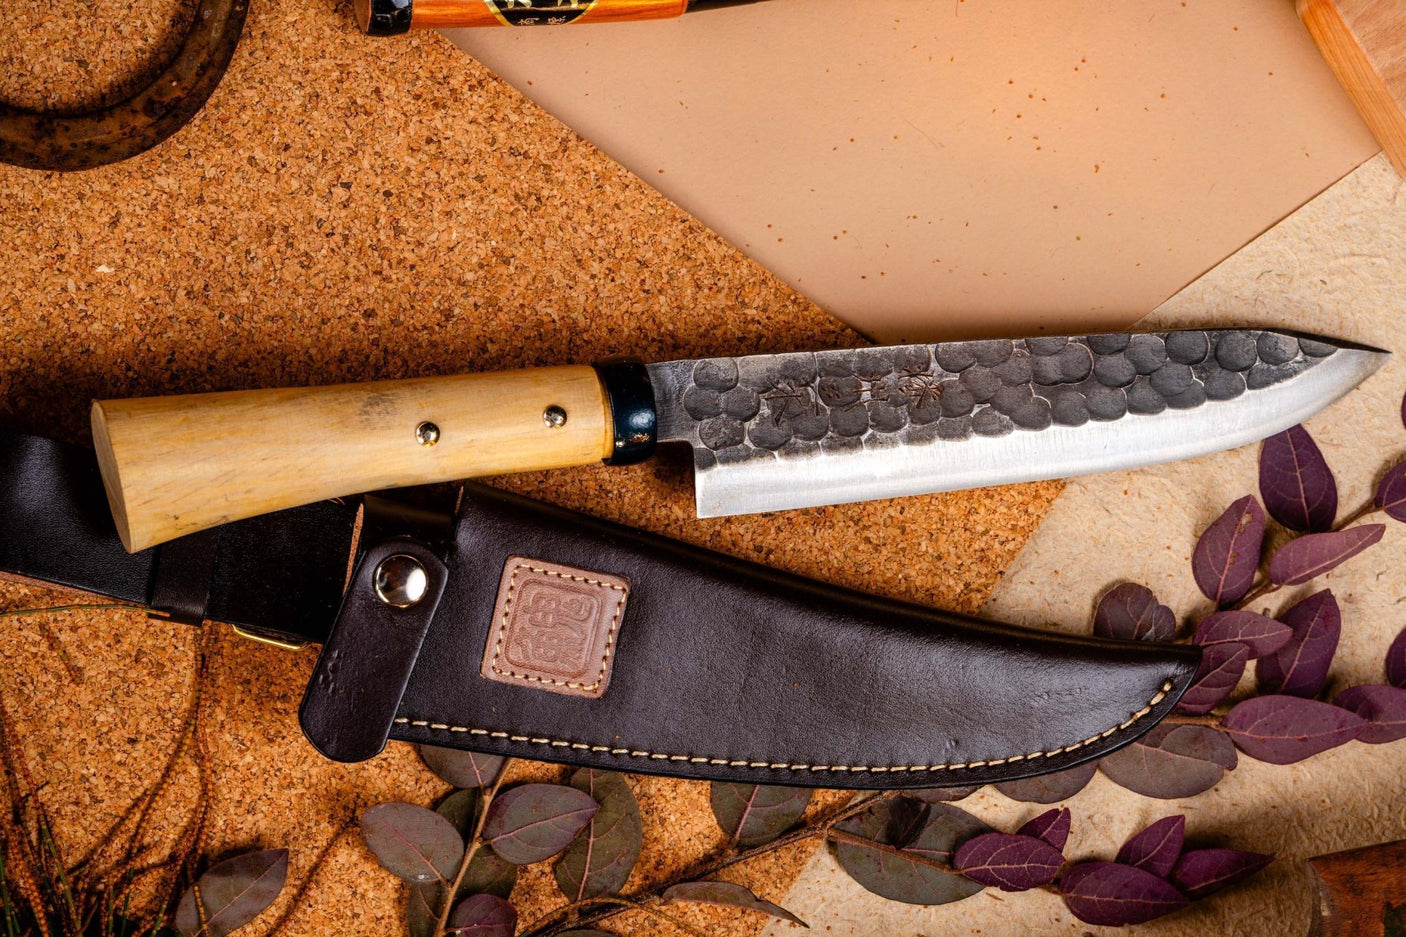 Handmade Outdoor Knife with Leather Sheath - Camping & Outdoors - Japanese Tools Australia